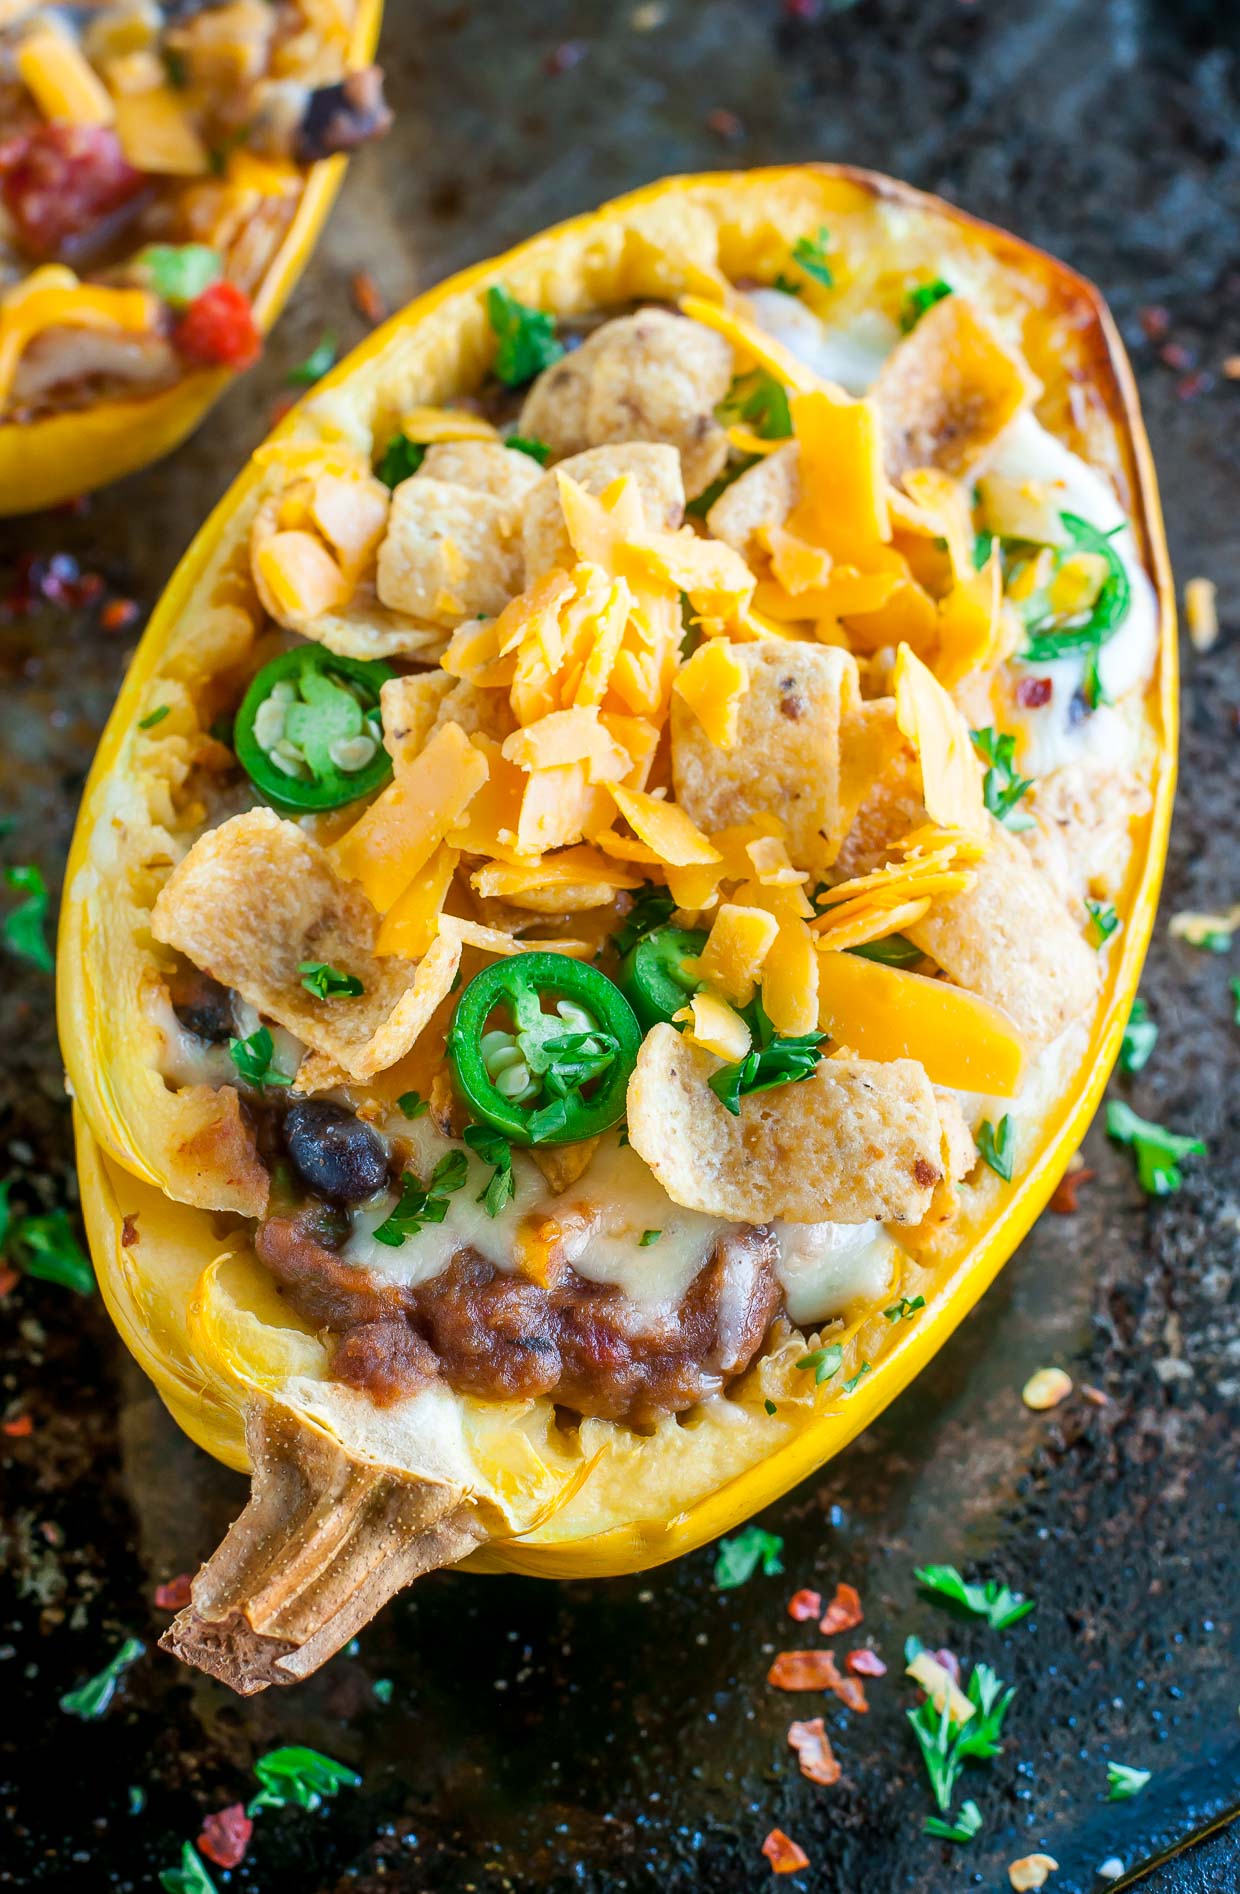 These easy cheesy Chili Stuffed Spaghetti Squash are 100% vegetarian and totally crave-worthy! Each GF squash boat can easily be made vegan or paleo too!